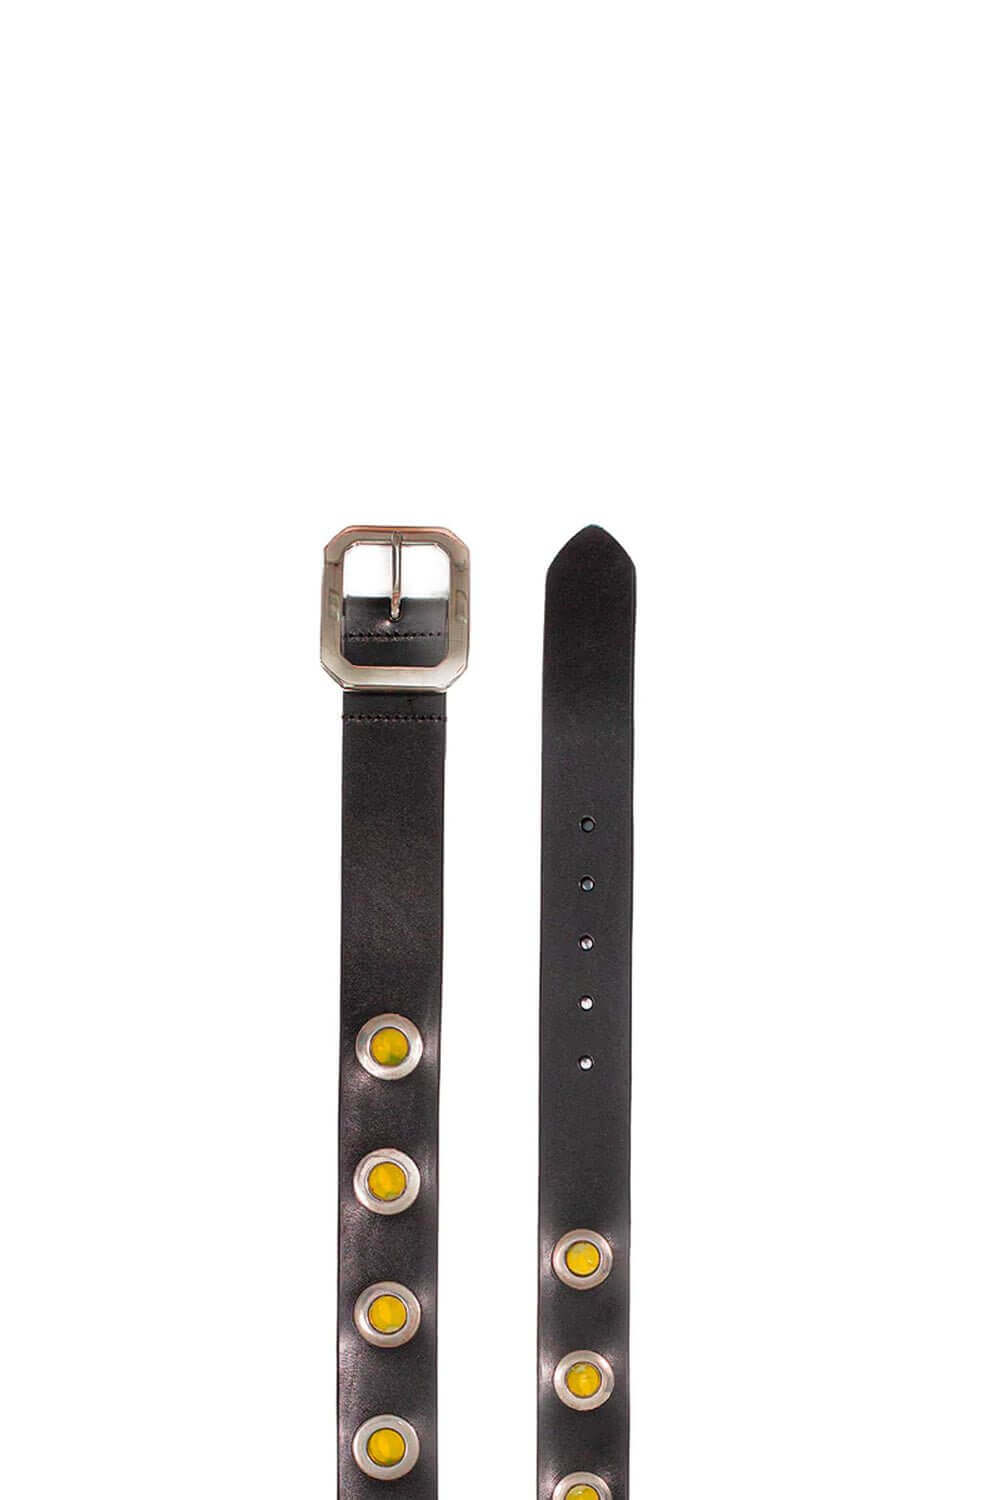 EYELET BELT Black leather belt with yellow eyelets. Squared buckle. Height: 4 cm. Made in Italy. HTC LOS ANGELES